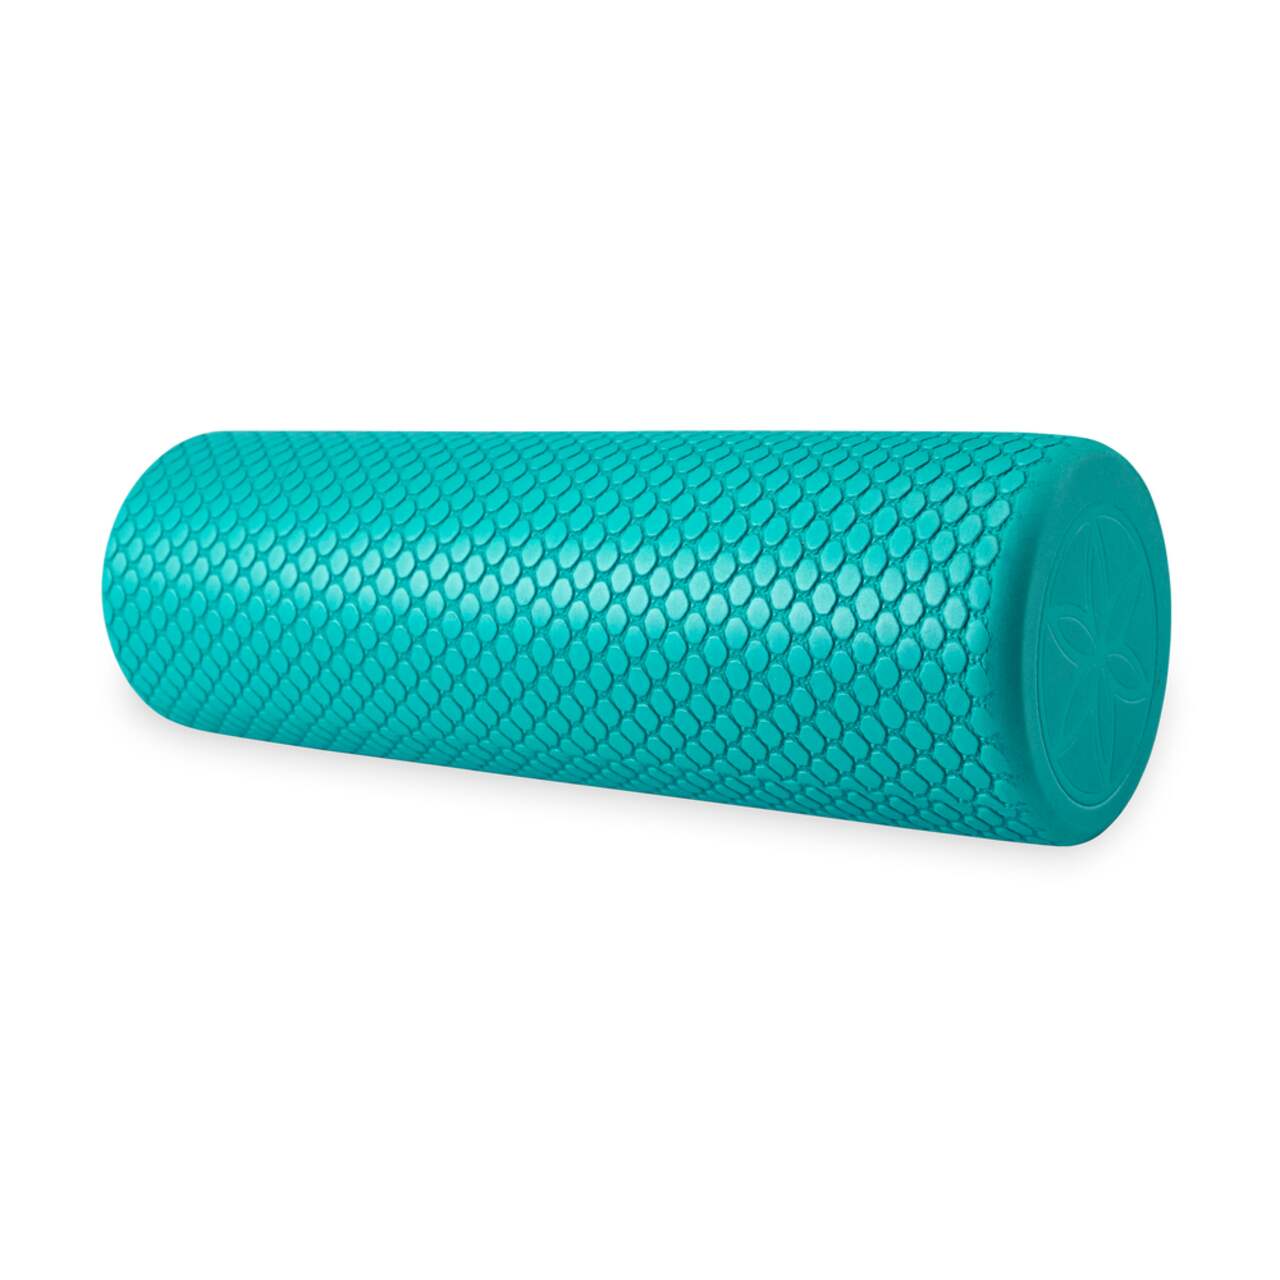 https://media-www.canadiantire.ca/product/playing/exercise/exercise-accessories/0848951/restore-12-compact-foam-roller-9a1630f6-e6ce-460e-9238-5d8998a51e36.png?imdensity=1&imwidth=640&impolicy=mZoom